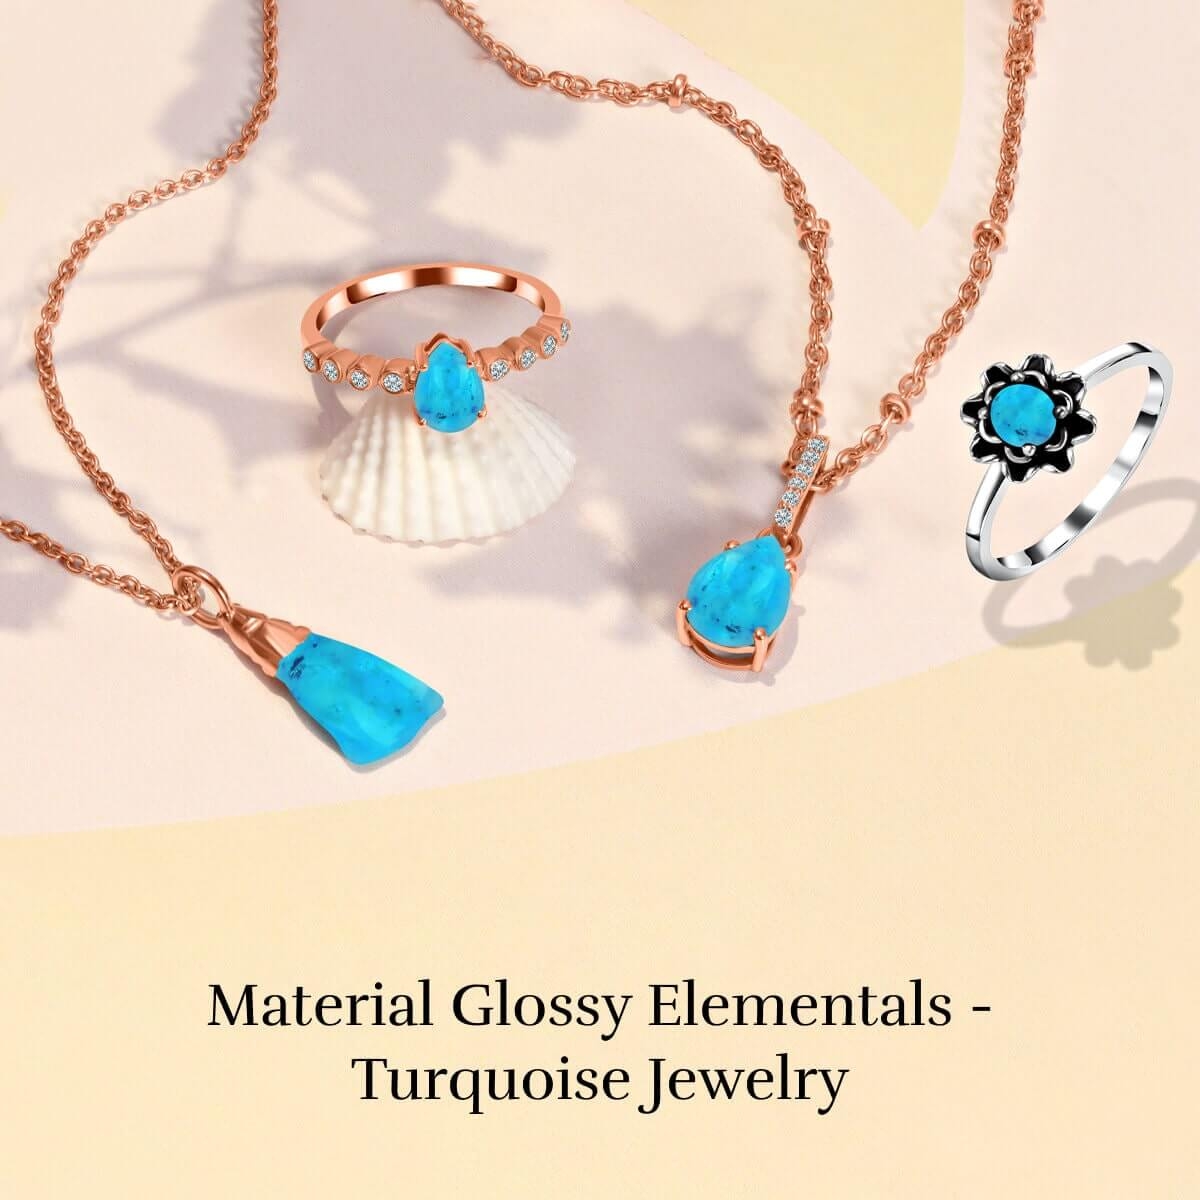 Turquoise gemstone Physical Properties